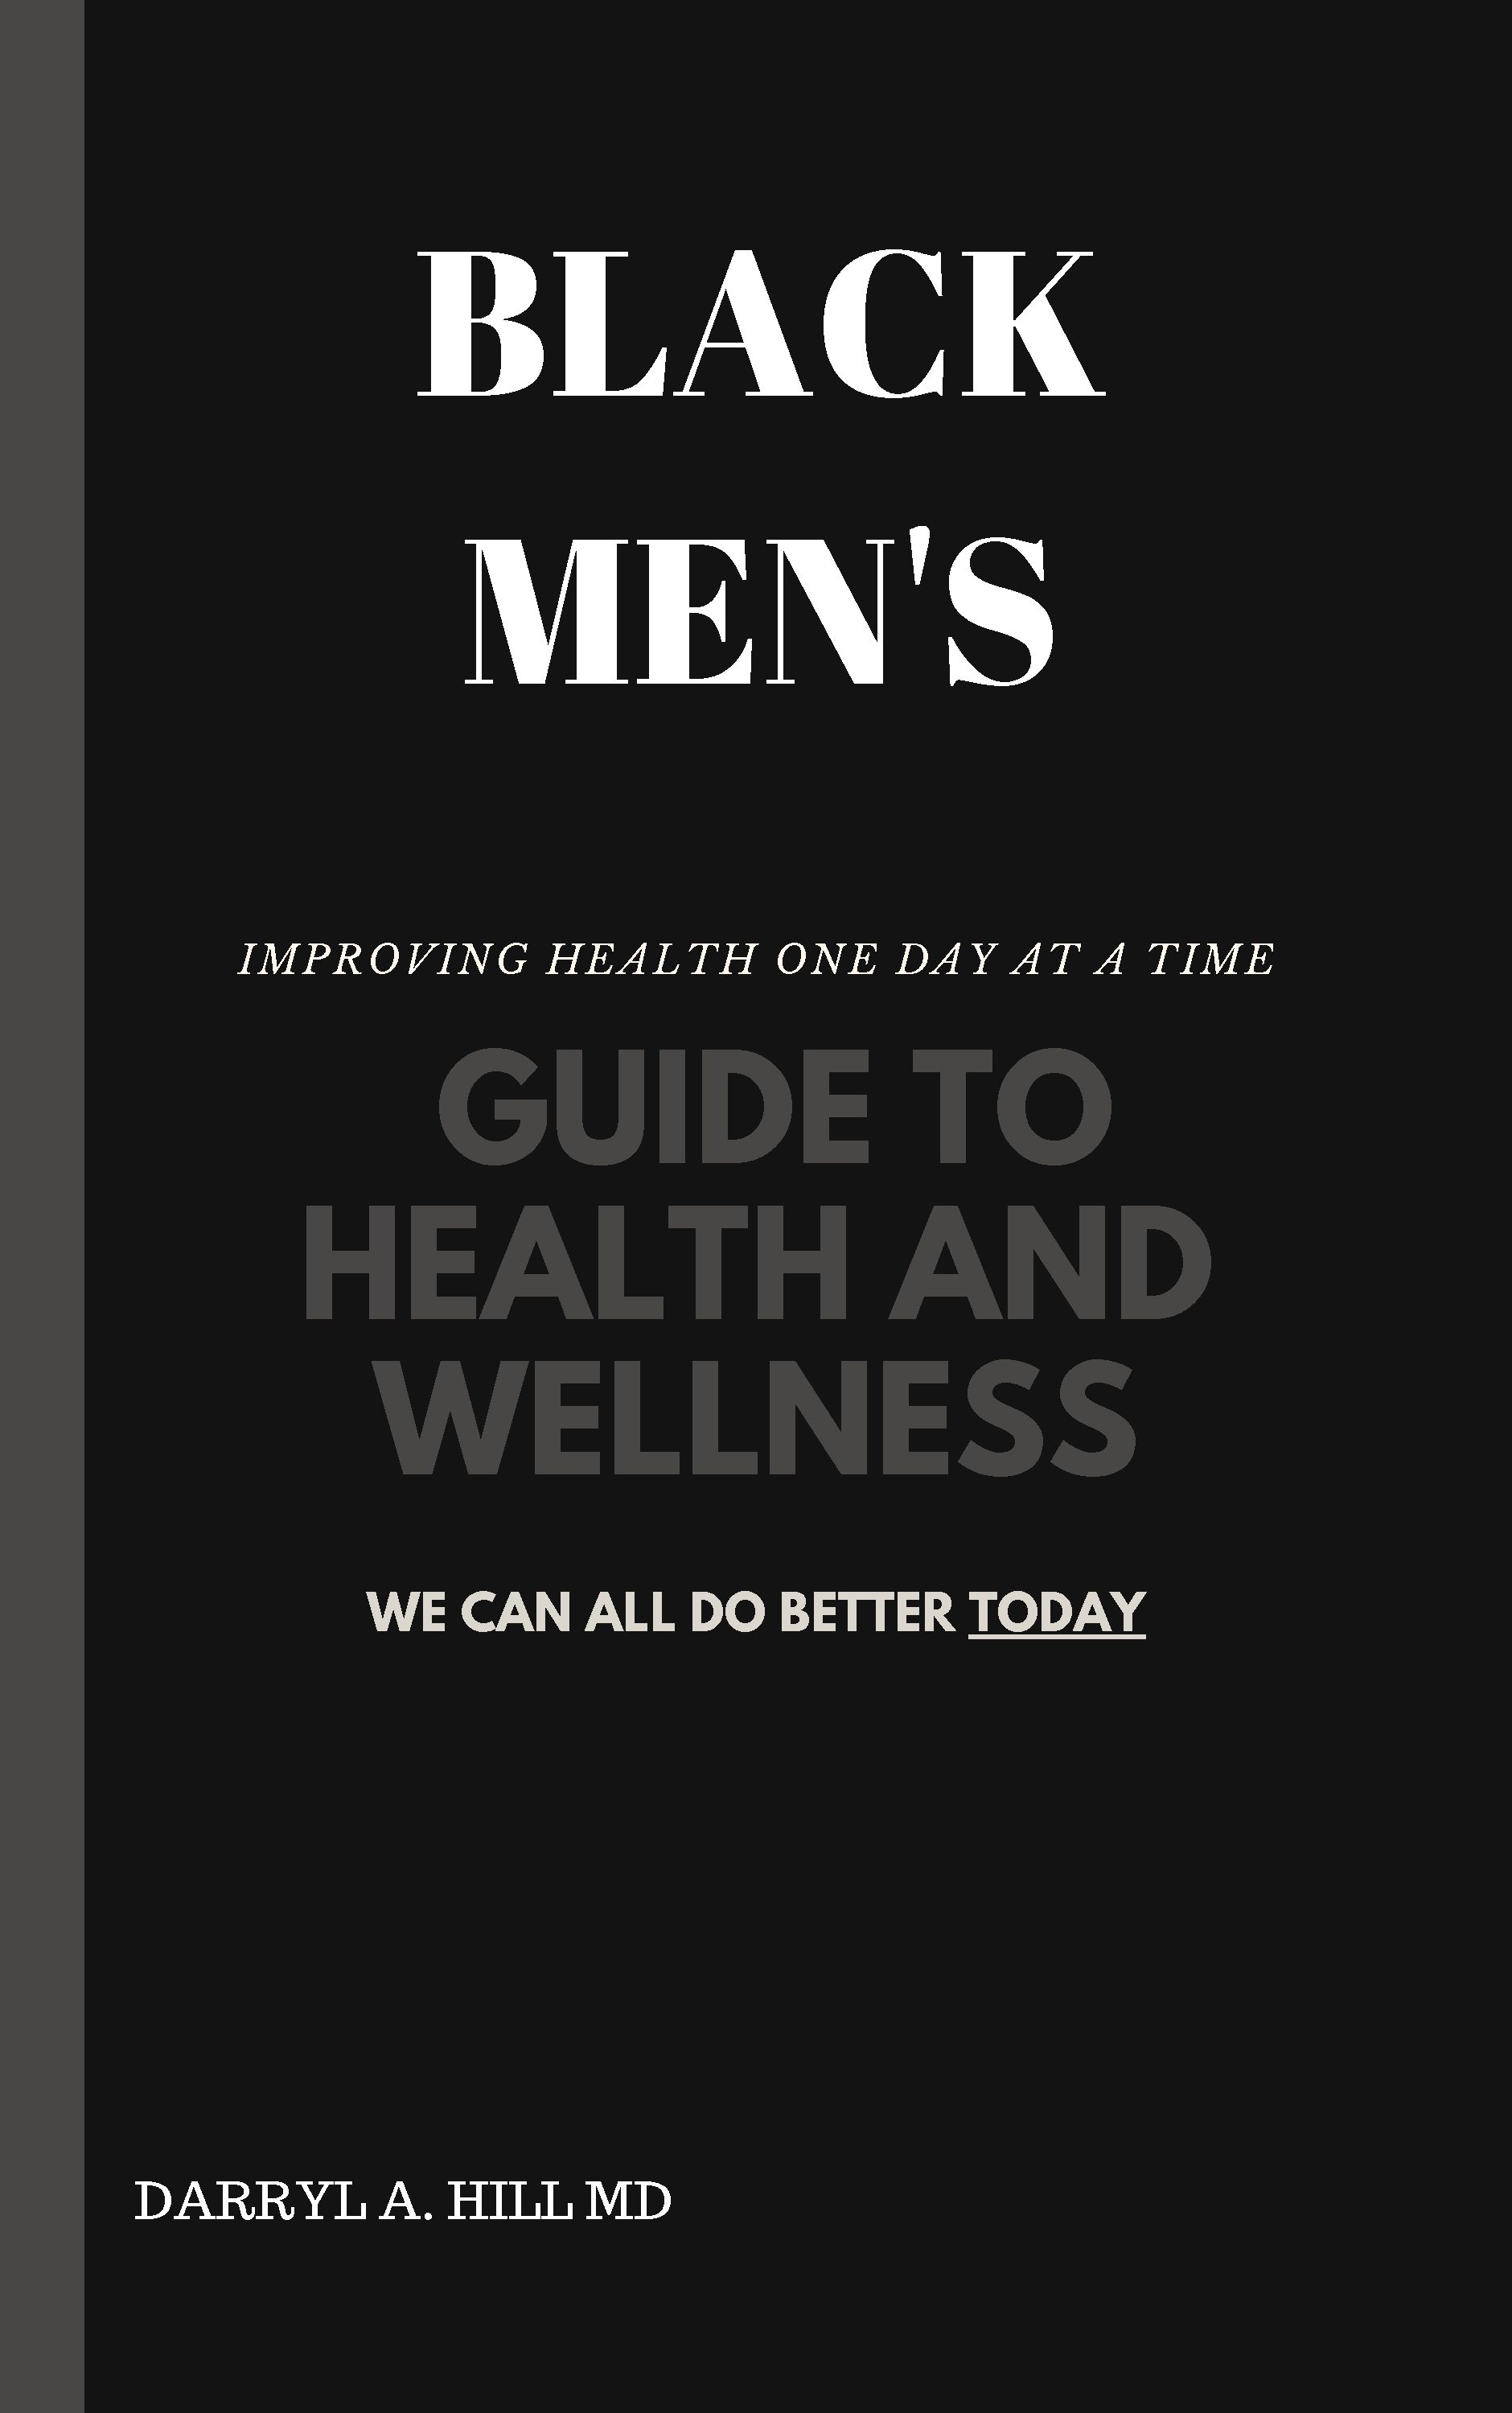 Black Men’s Guide to Health and Wellness_EBook